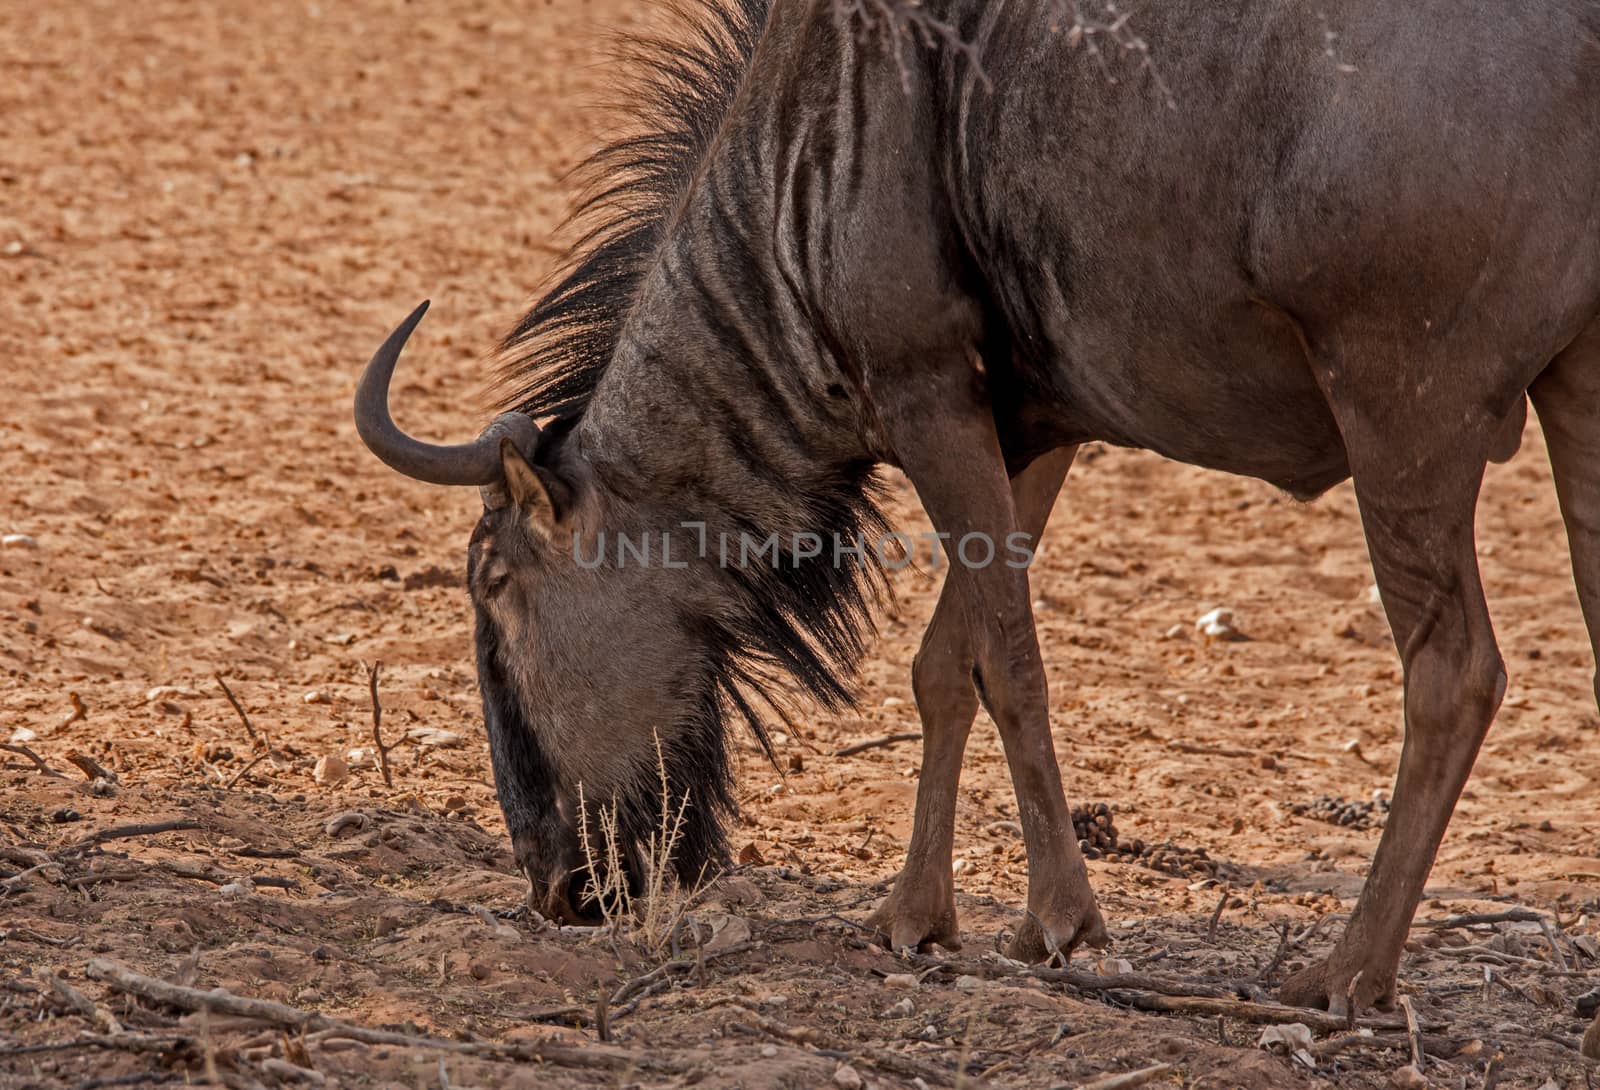 A Common wildebeest (Connochaetes taurinus) photographed in Kgalagadi Trans National Park, South Africa.